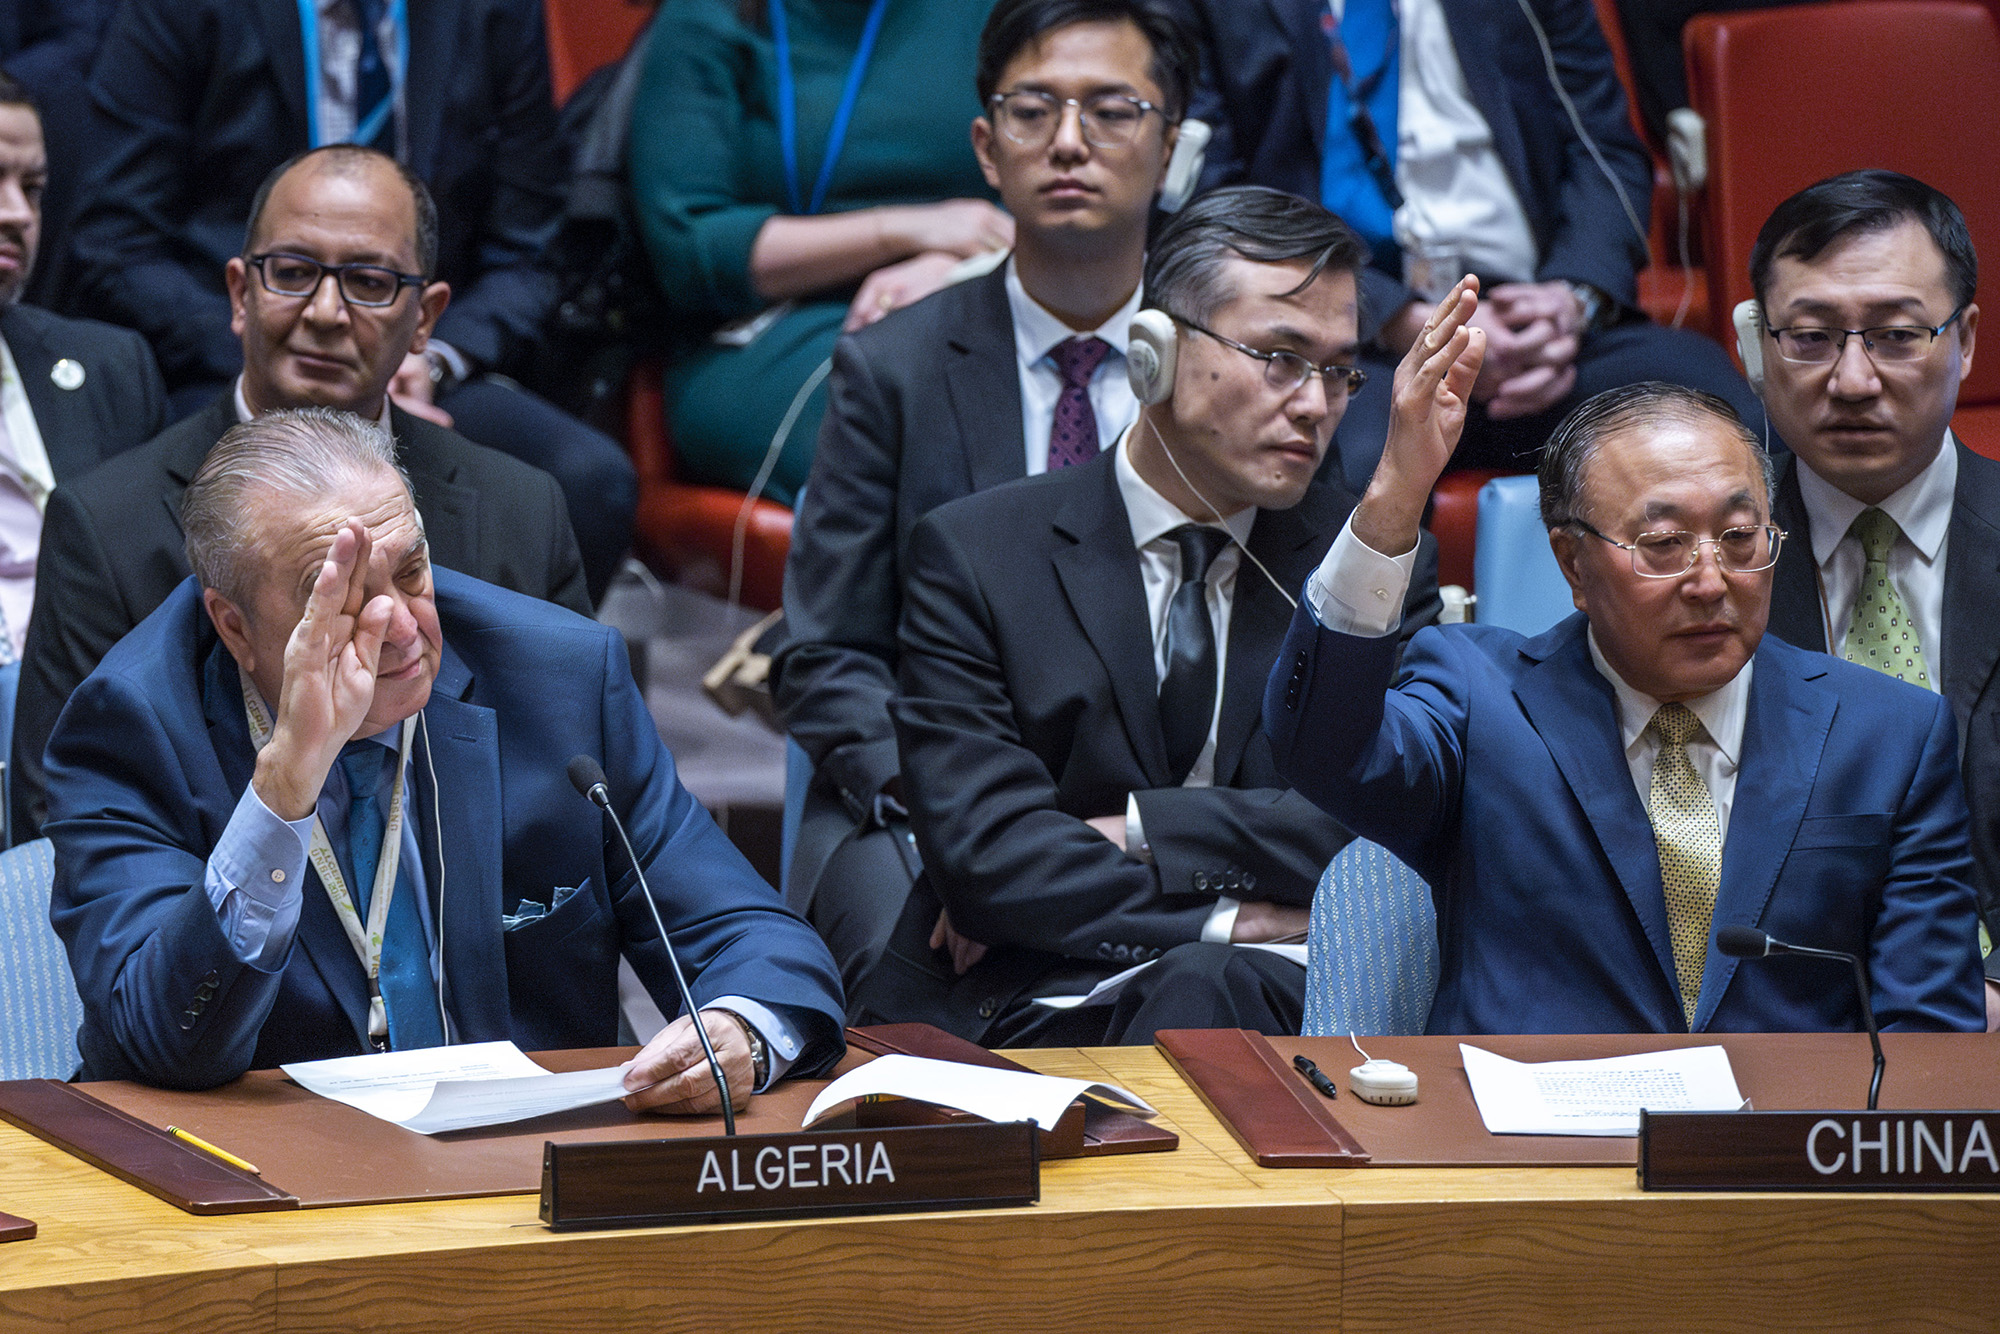 Permanent Representative of Algeria to the United Nations Amar Bendjama, left, and China's ambassador to the United Nations, Zhang Jun, vote against a U.S. ceasefire resolution during a UN Security Council meeting at the United Nations headquarters on March 22.